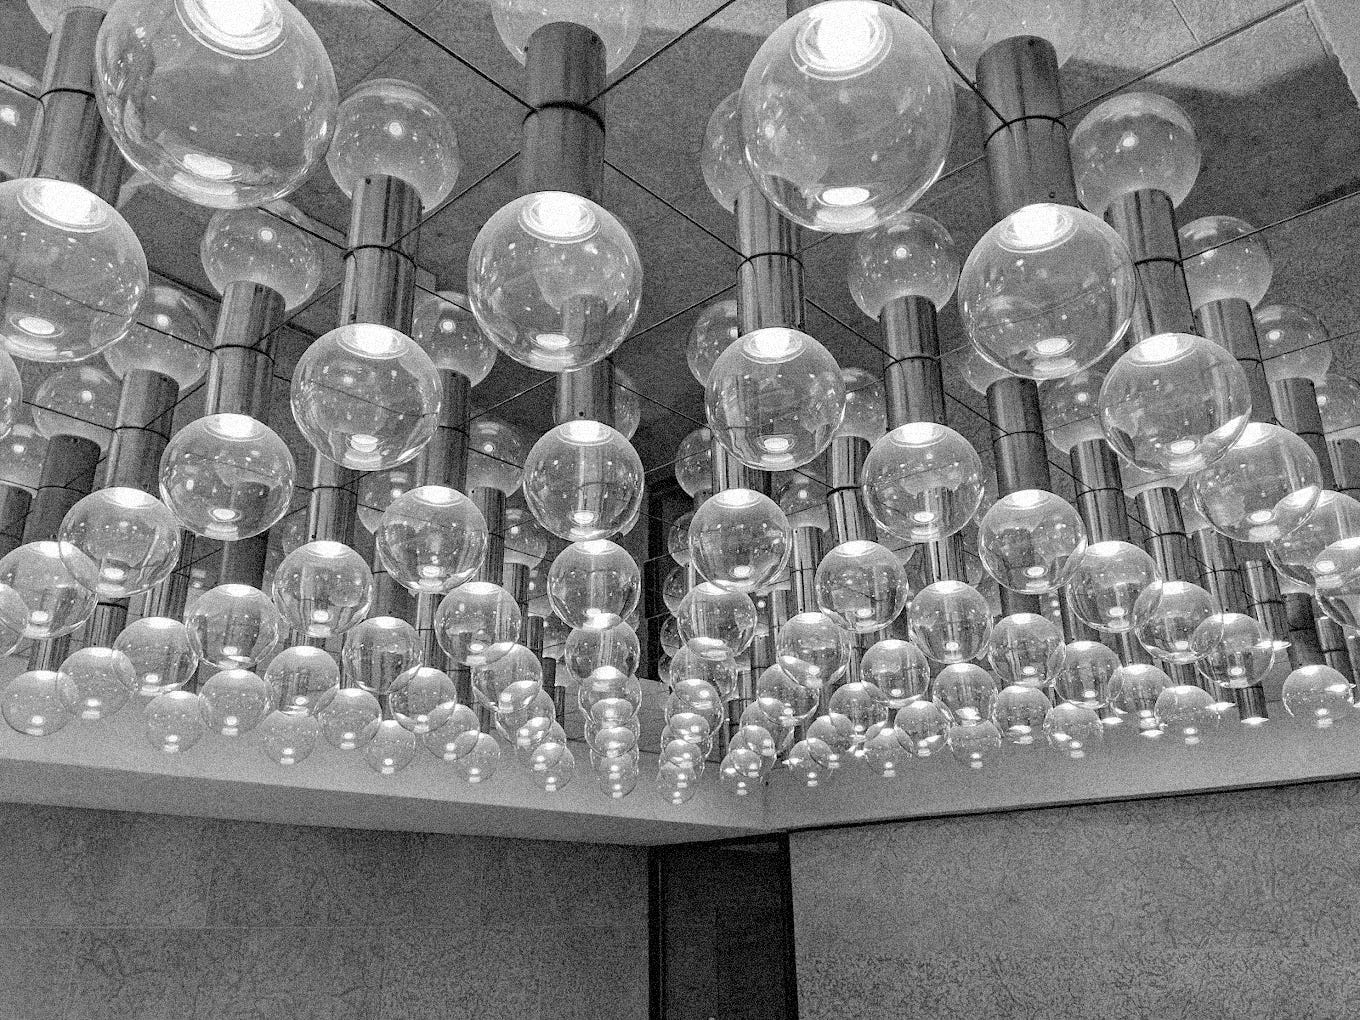 a black and white grainy photo of a mirrored ceiling with rows and rows of mounted lightbulbs 